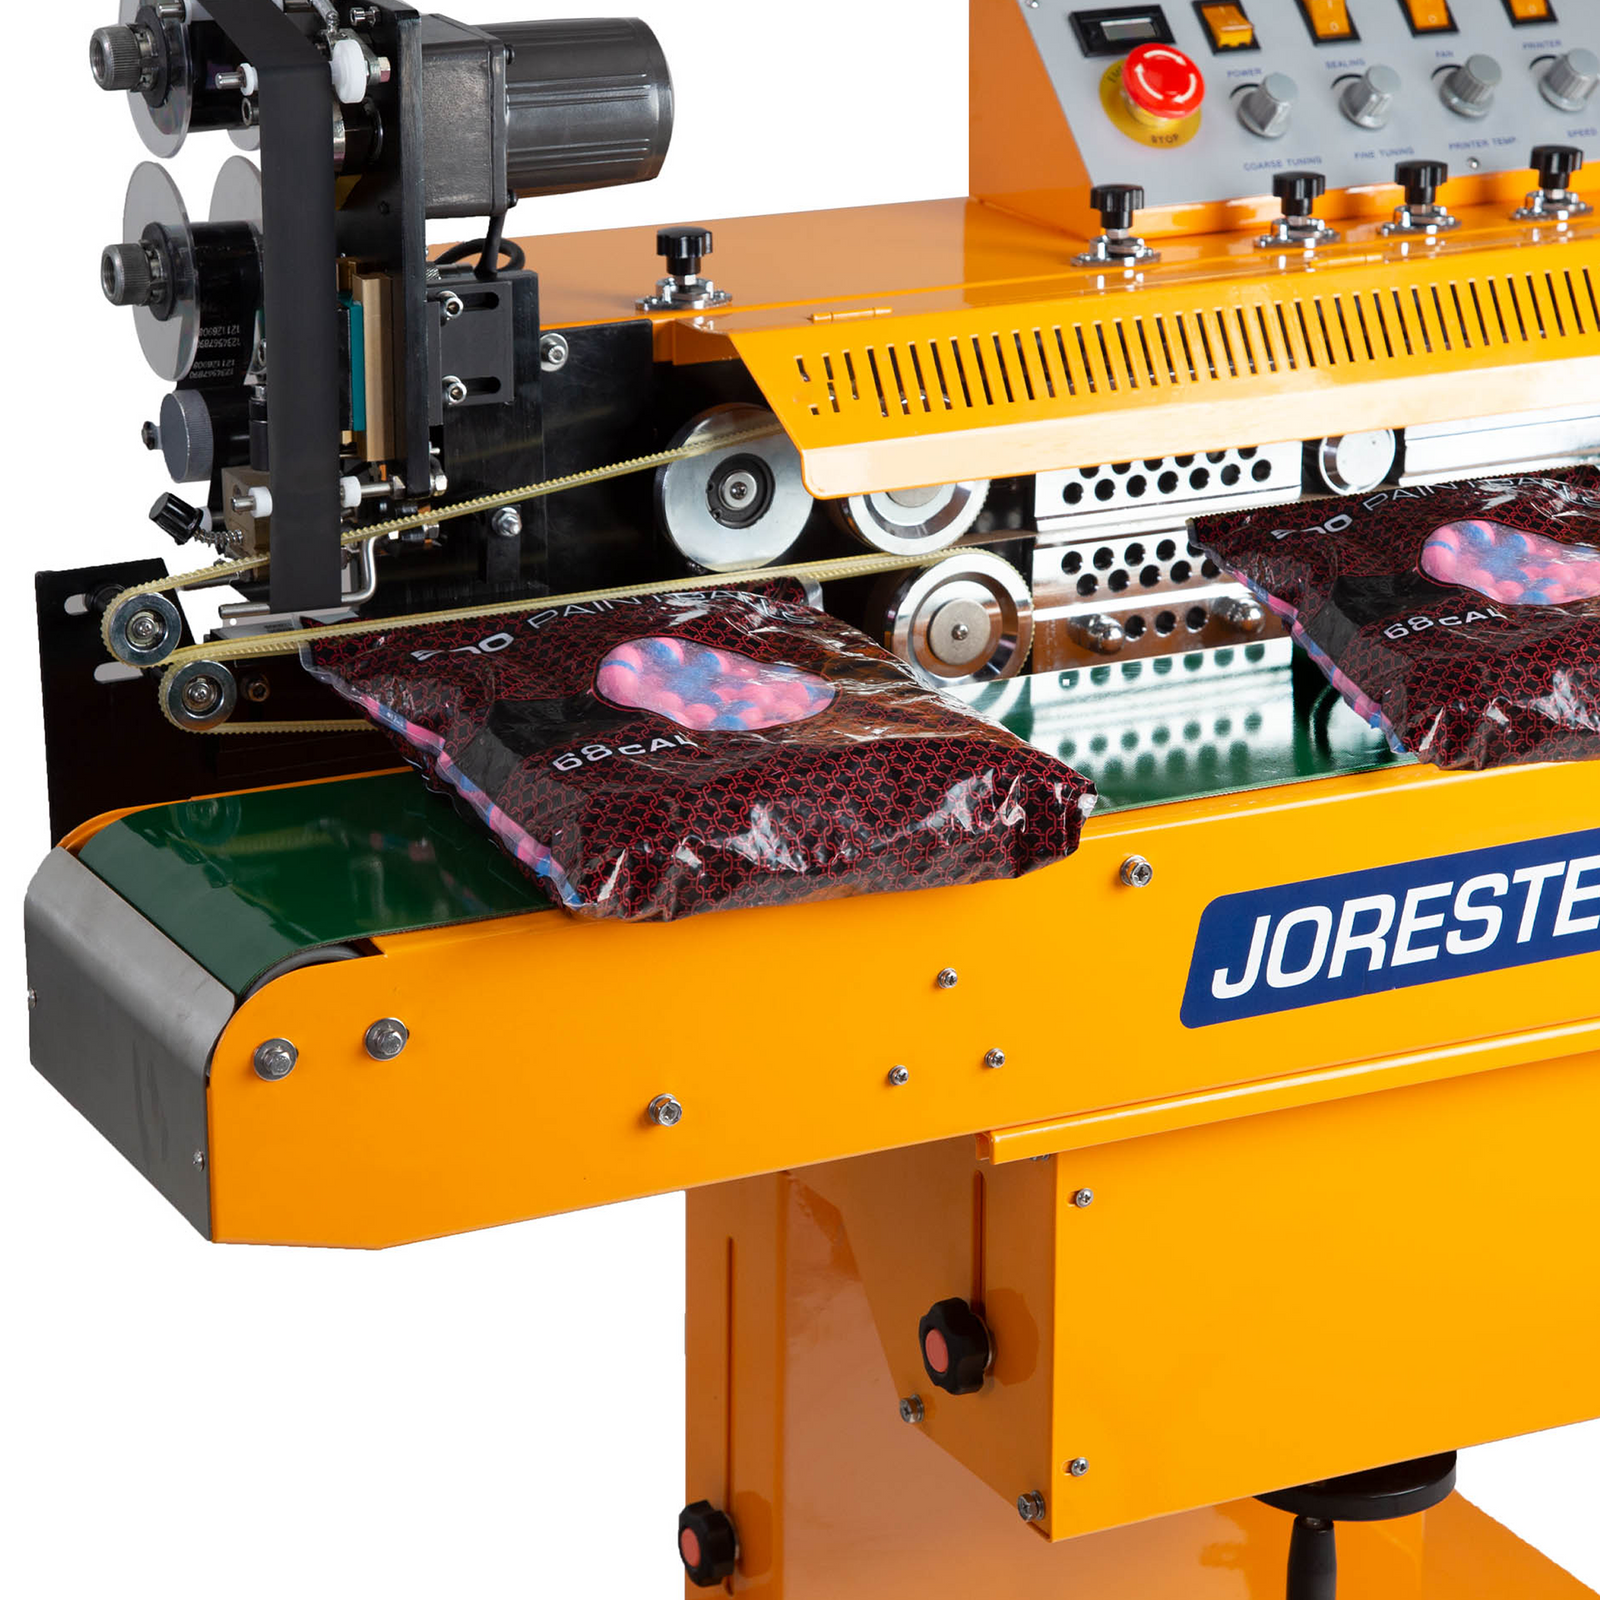 close up of the yellow JORESTECH horizontal continuous band sealer with wheels  sealing and hot stamp coding plastic bags filled with blue and pink balls. Also shows the hot stamp coder of the continuous band sealer wit a roll of black hot stamp ink roll installed